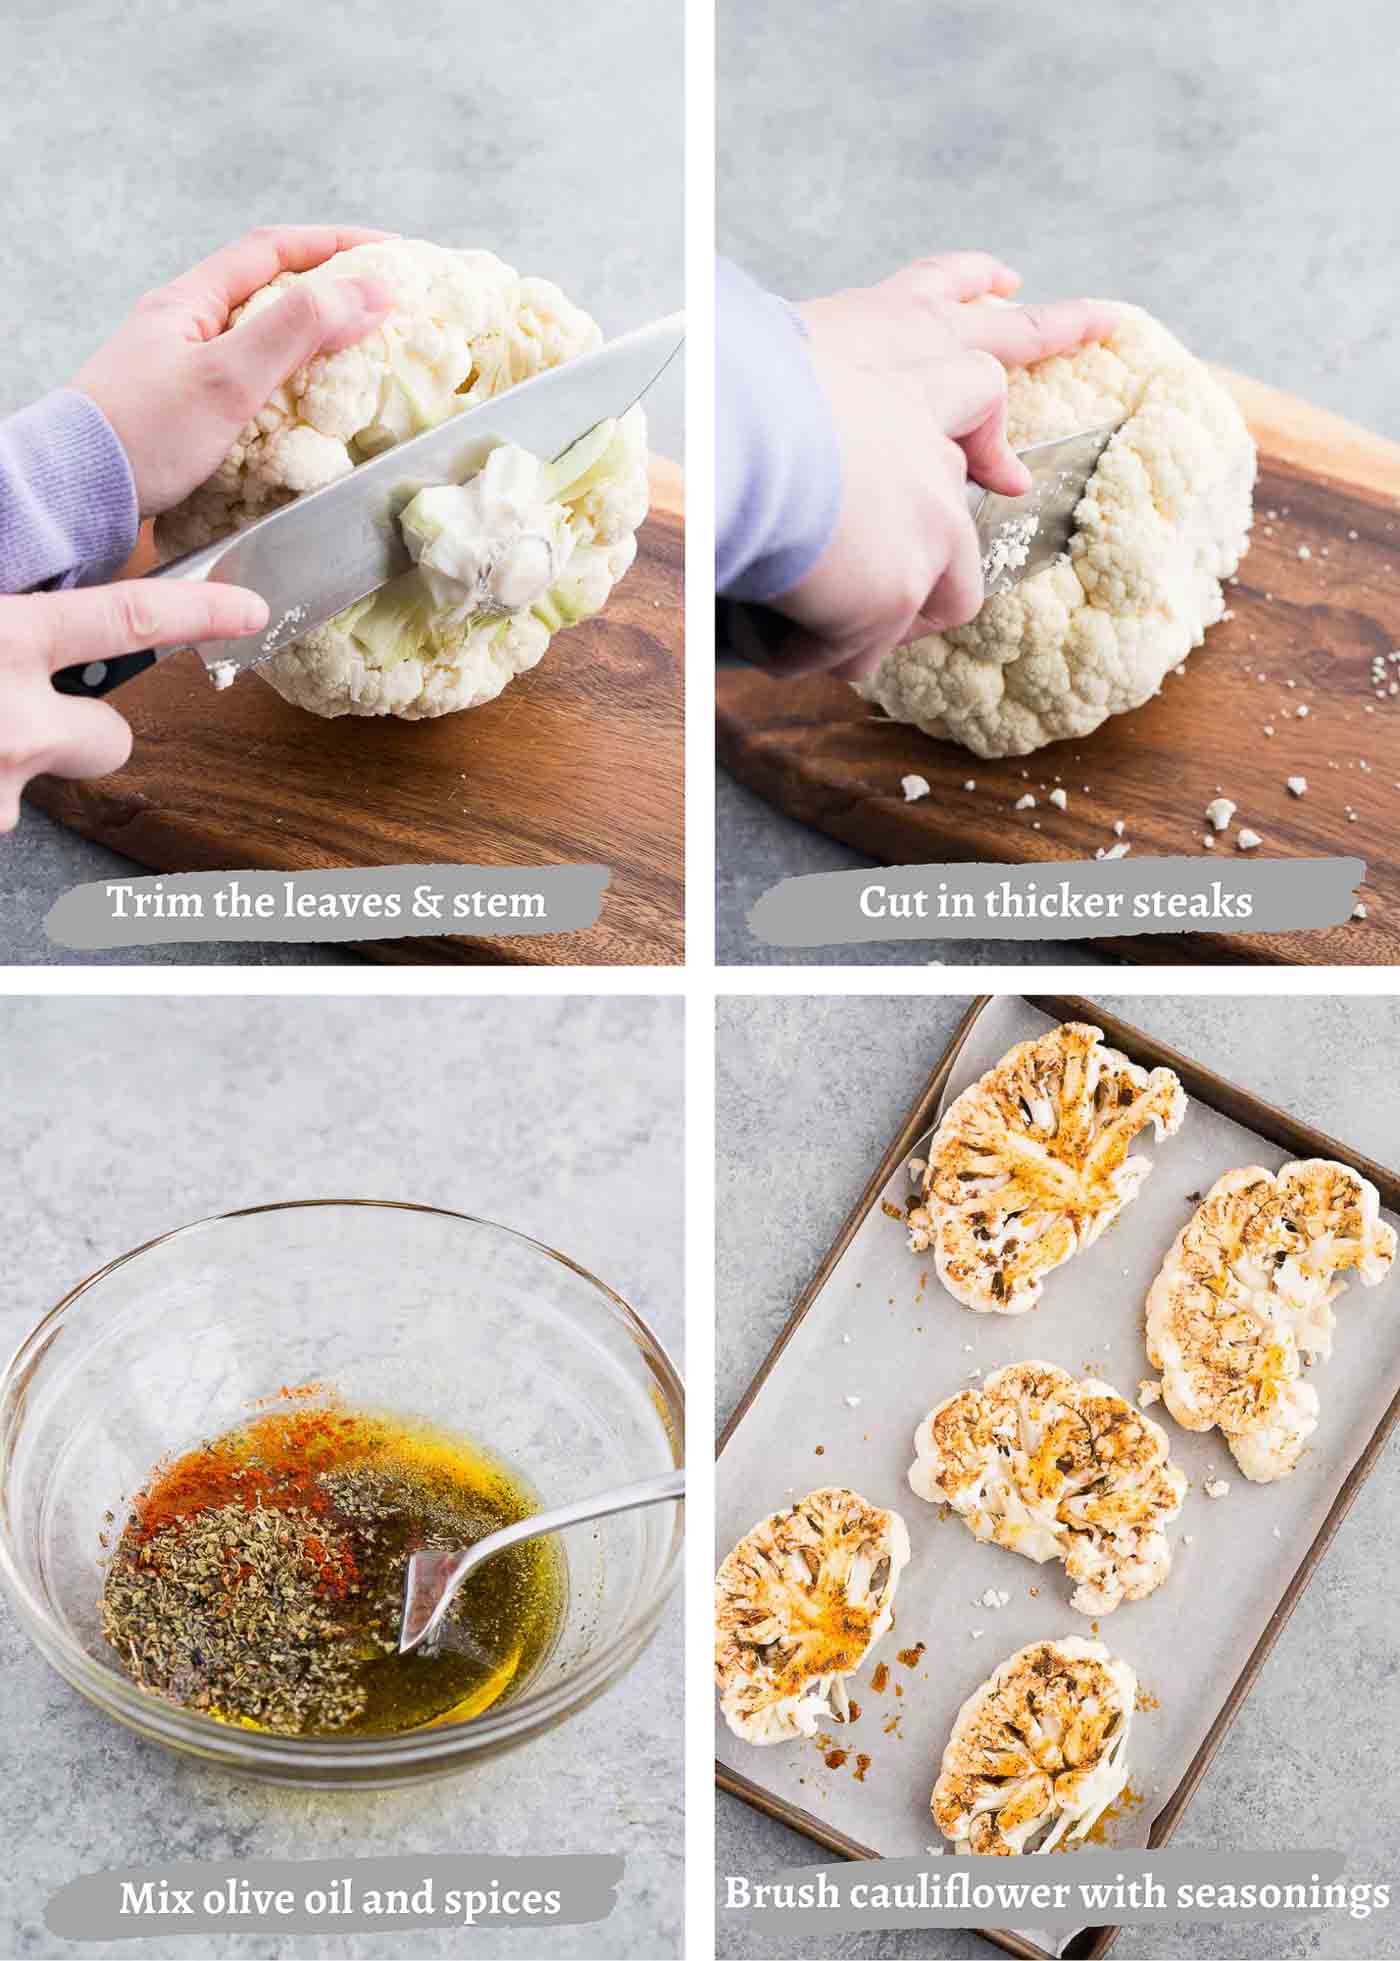 process images of making cauliflower steaks